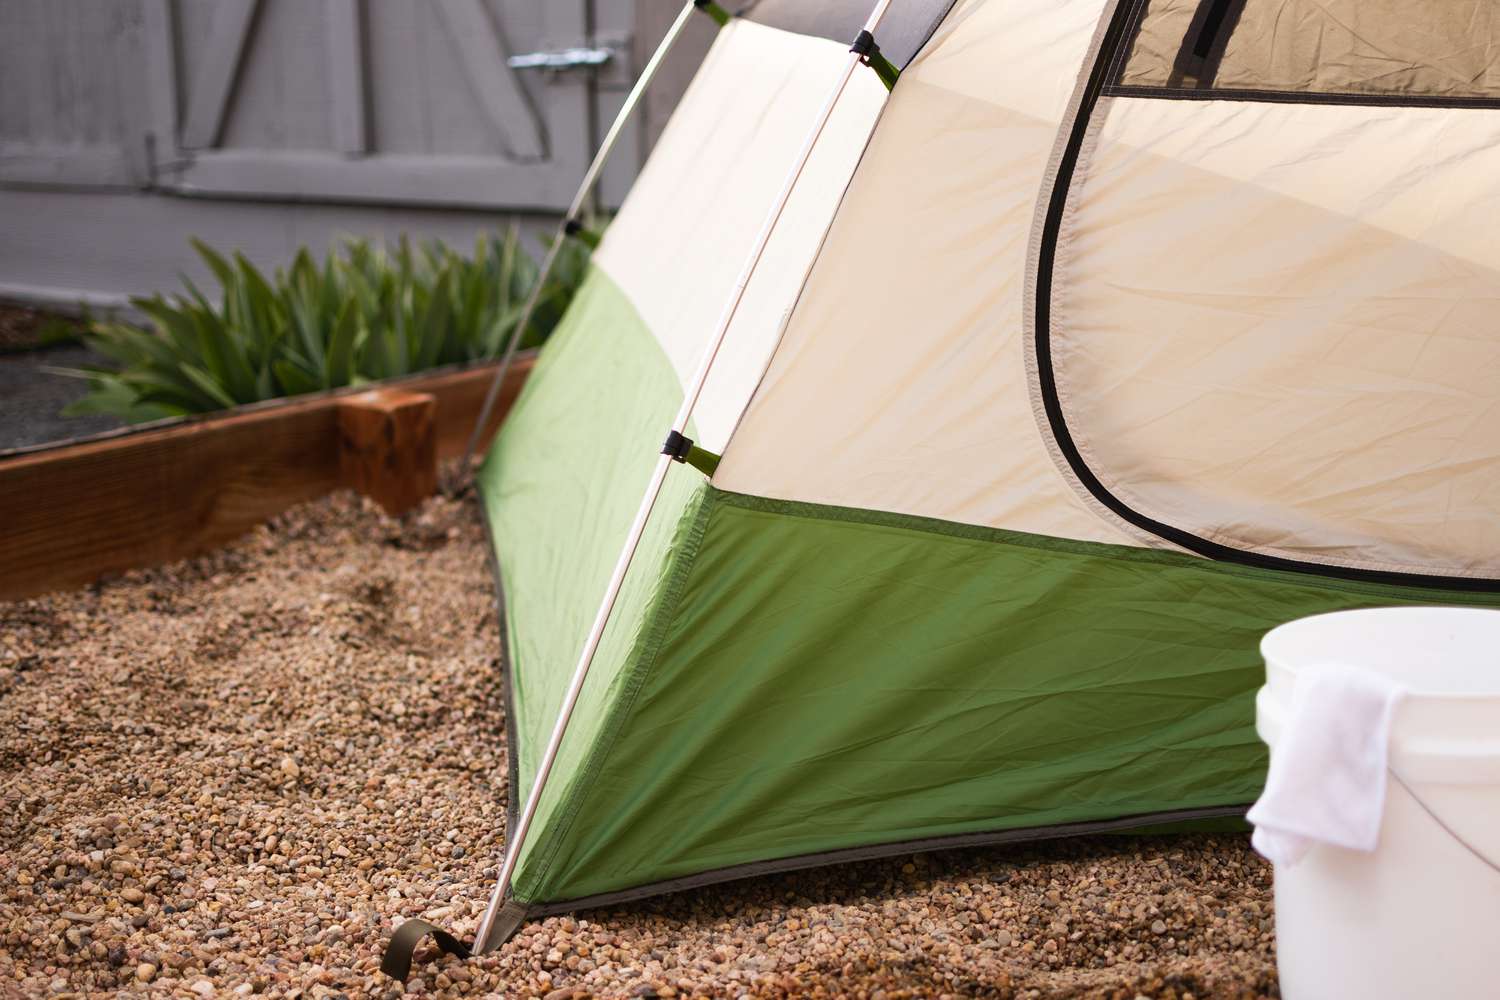 Green and cream colored tent air drying in sunlight with vinegar solution